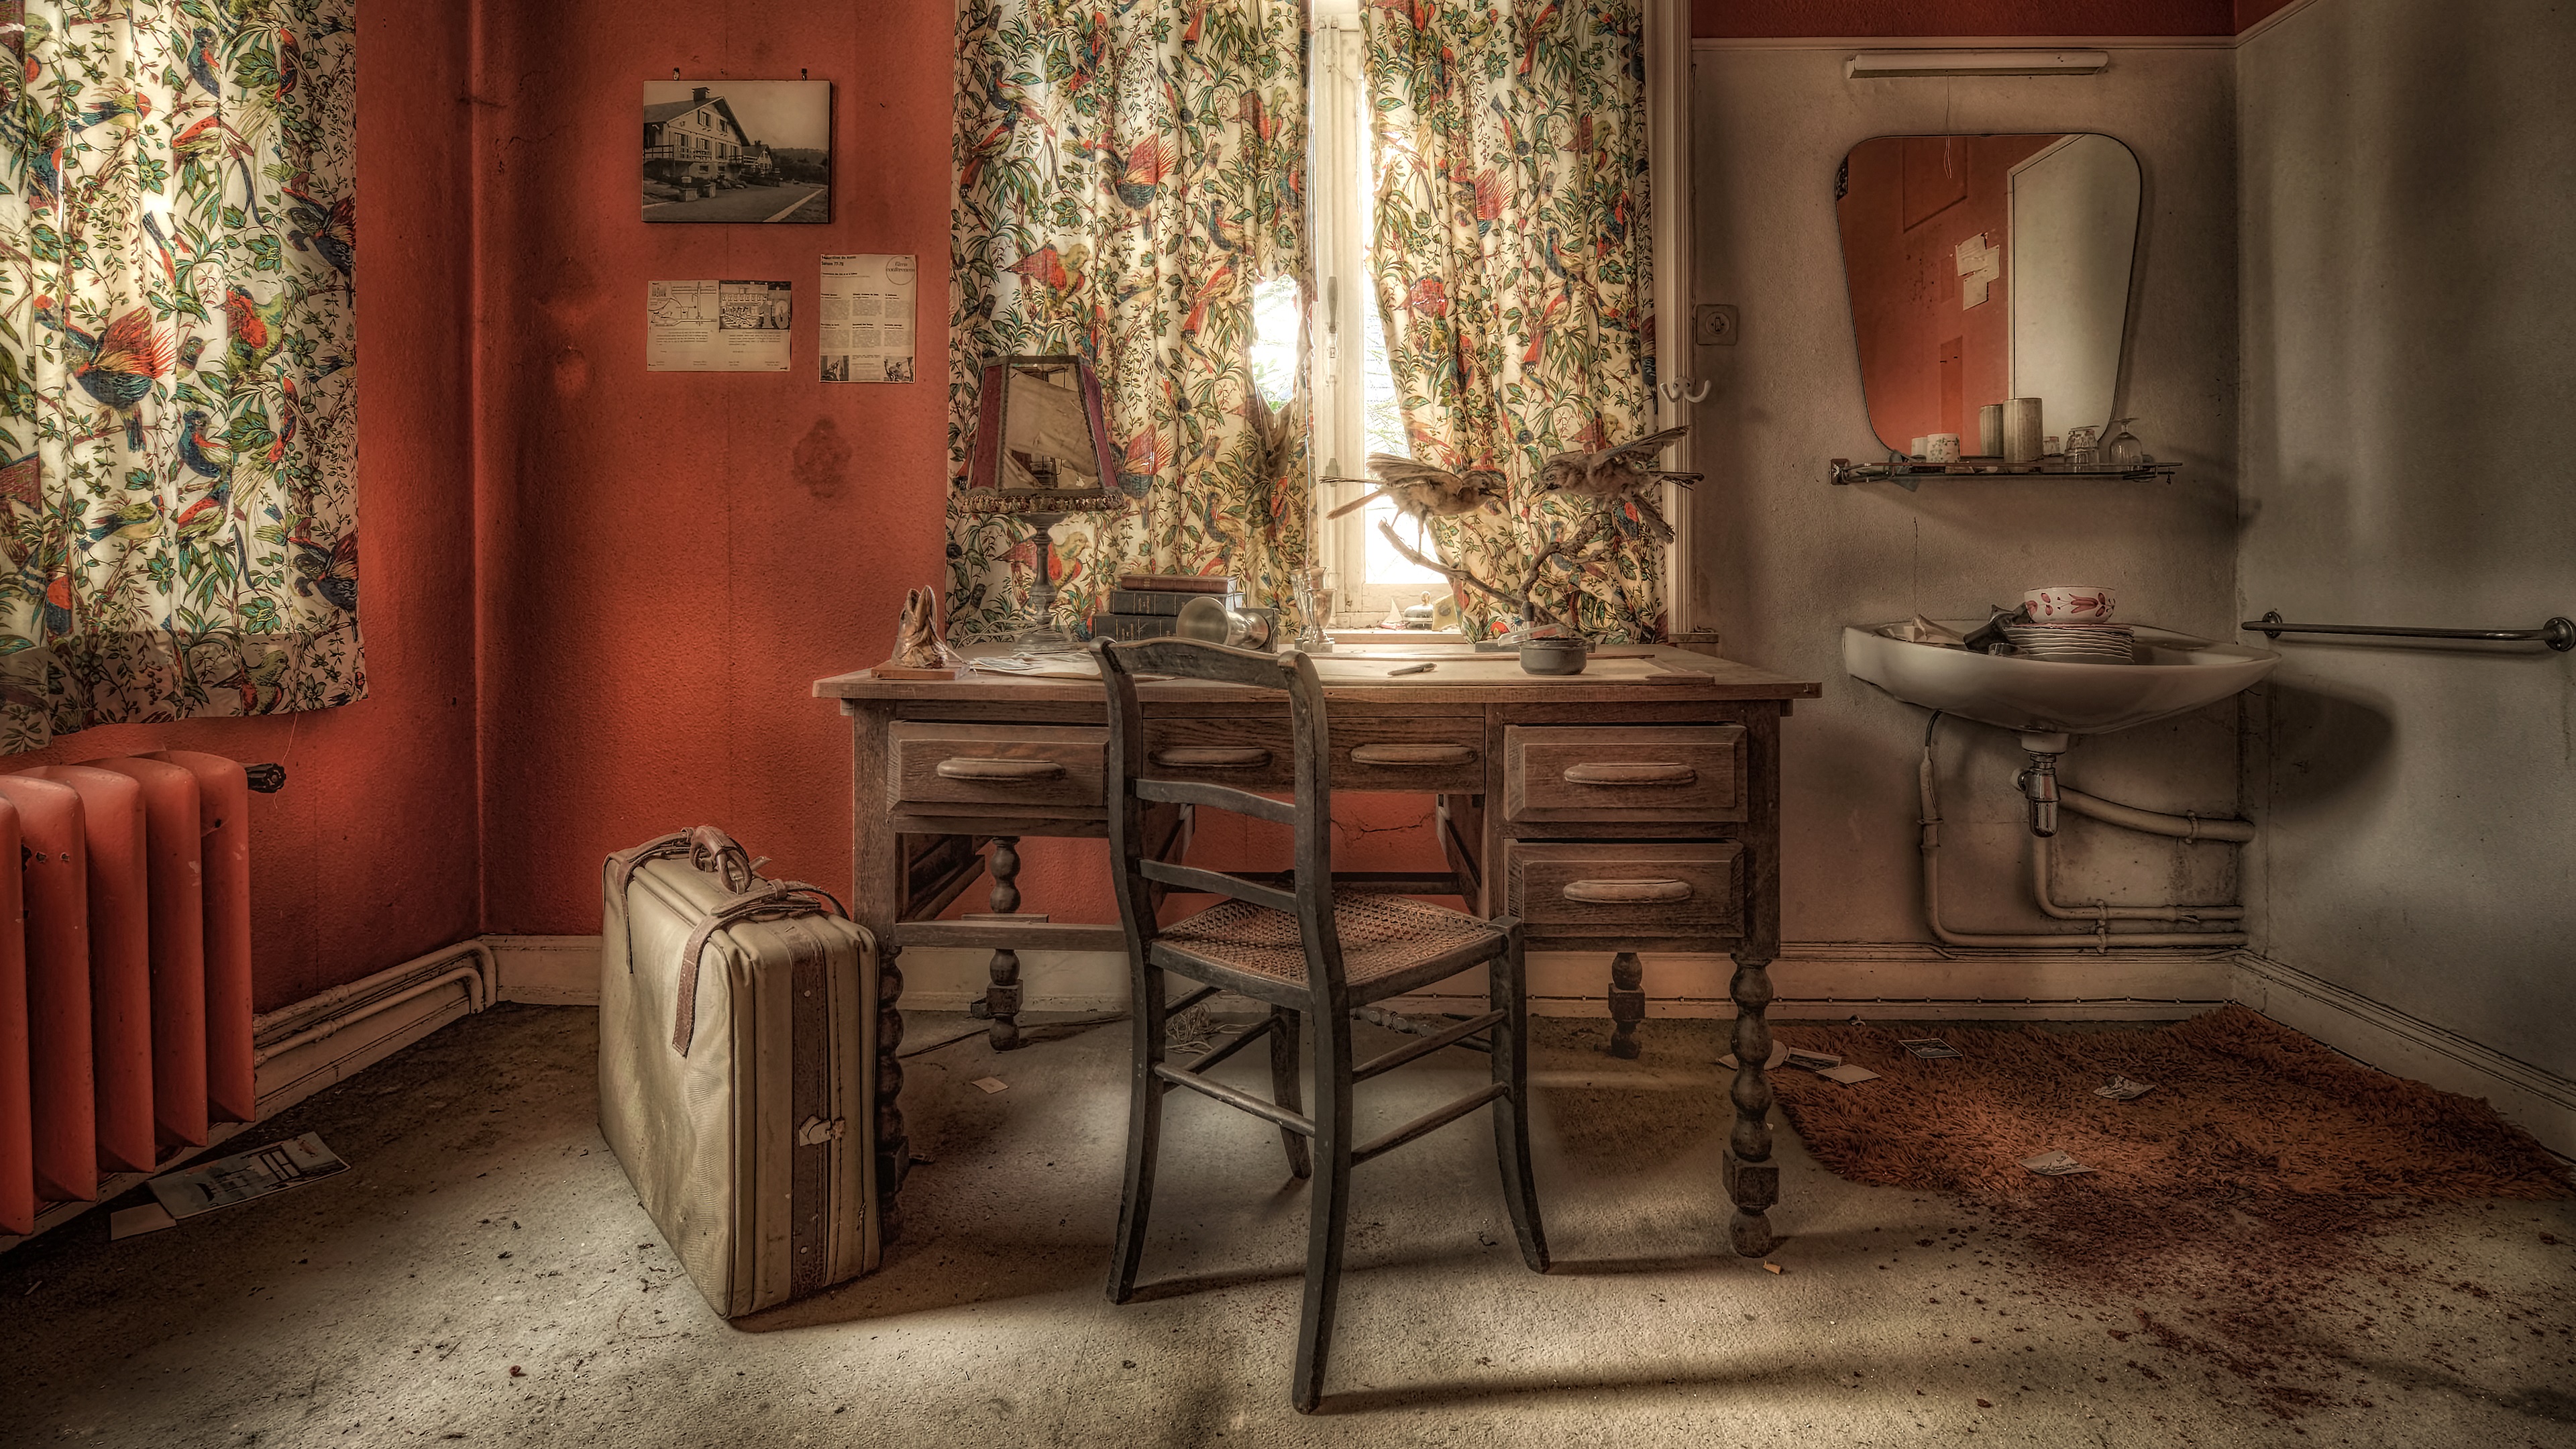 Vintage Room with Suitcase